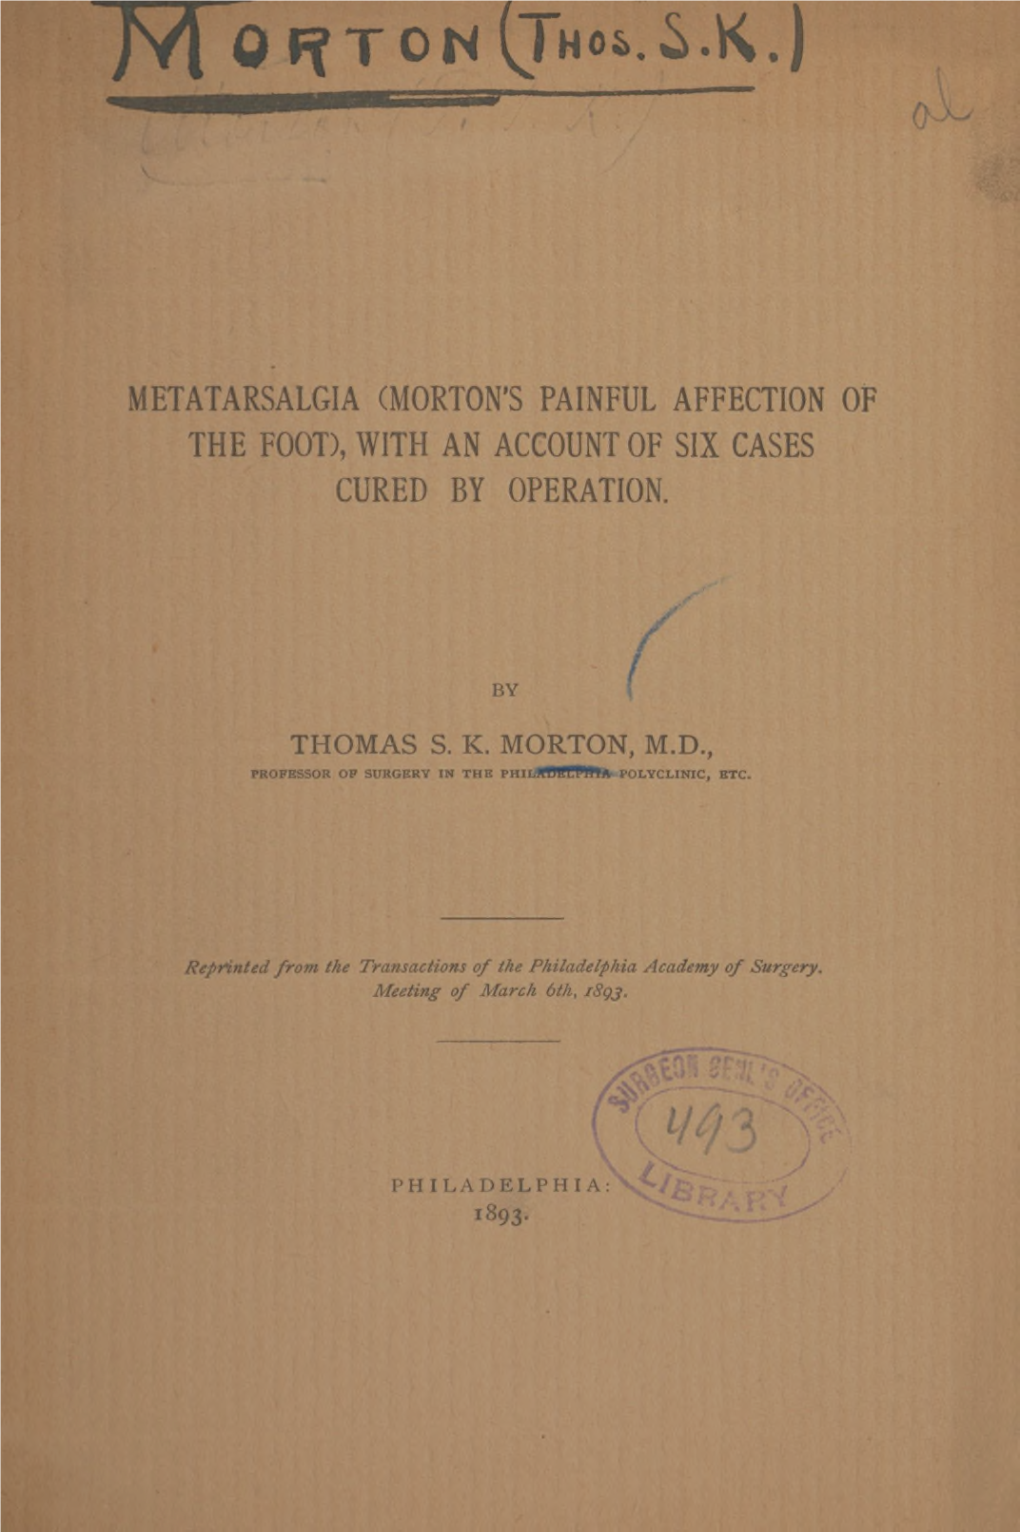 Metatarsalgia (Morton's Painful Affection of the Foot), with an Account of Six Cases Cured by Operation